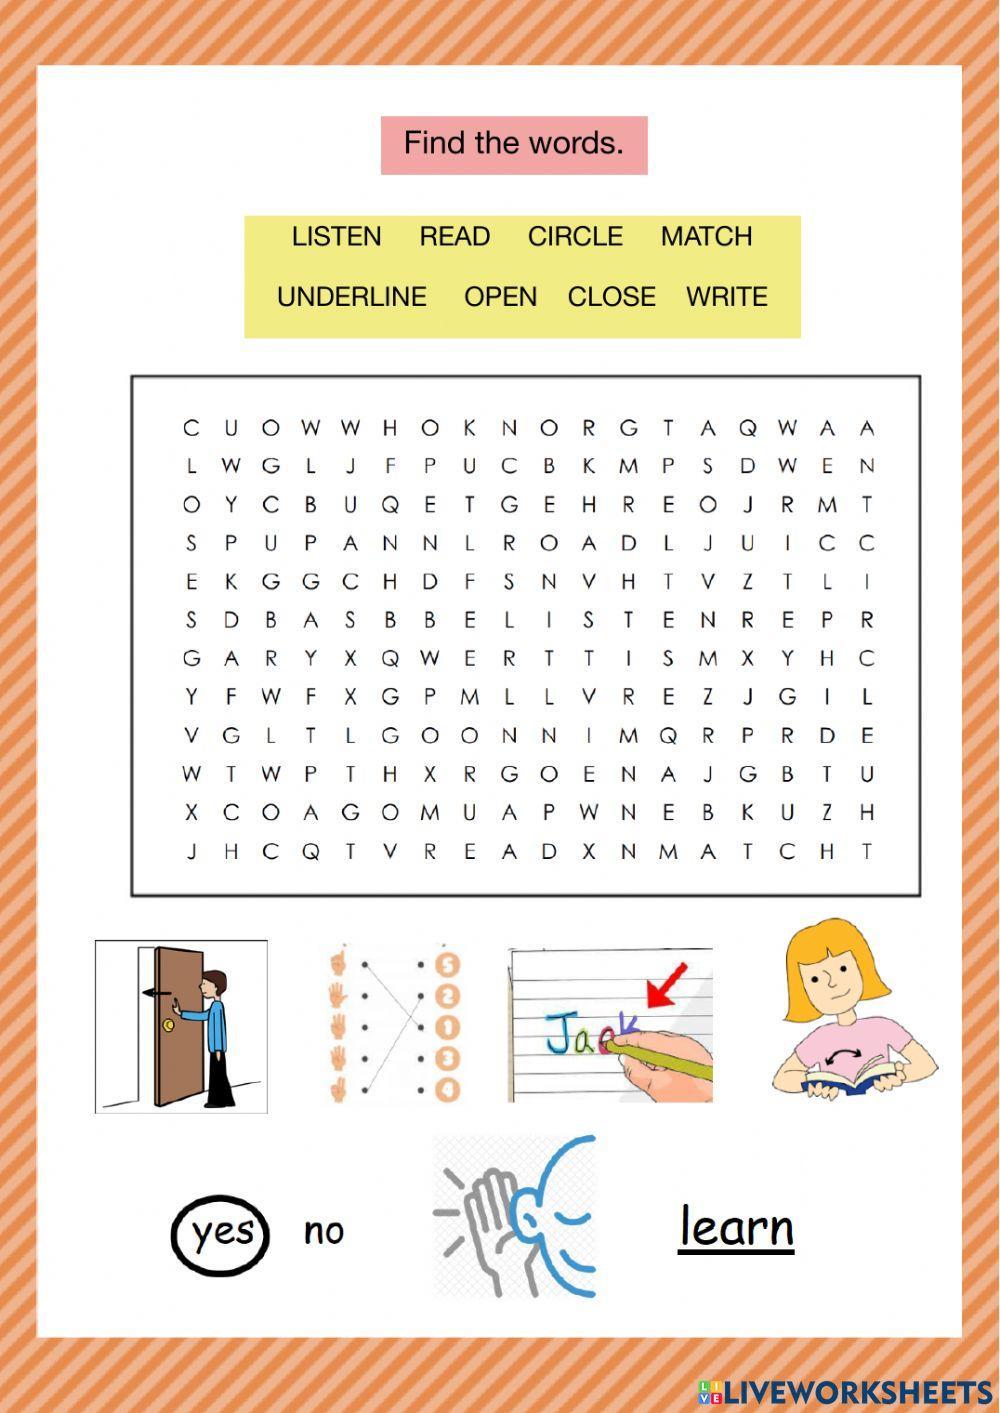 Classroom instructions - Word search